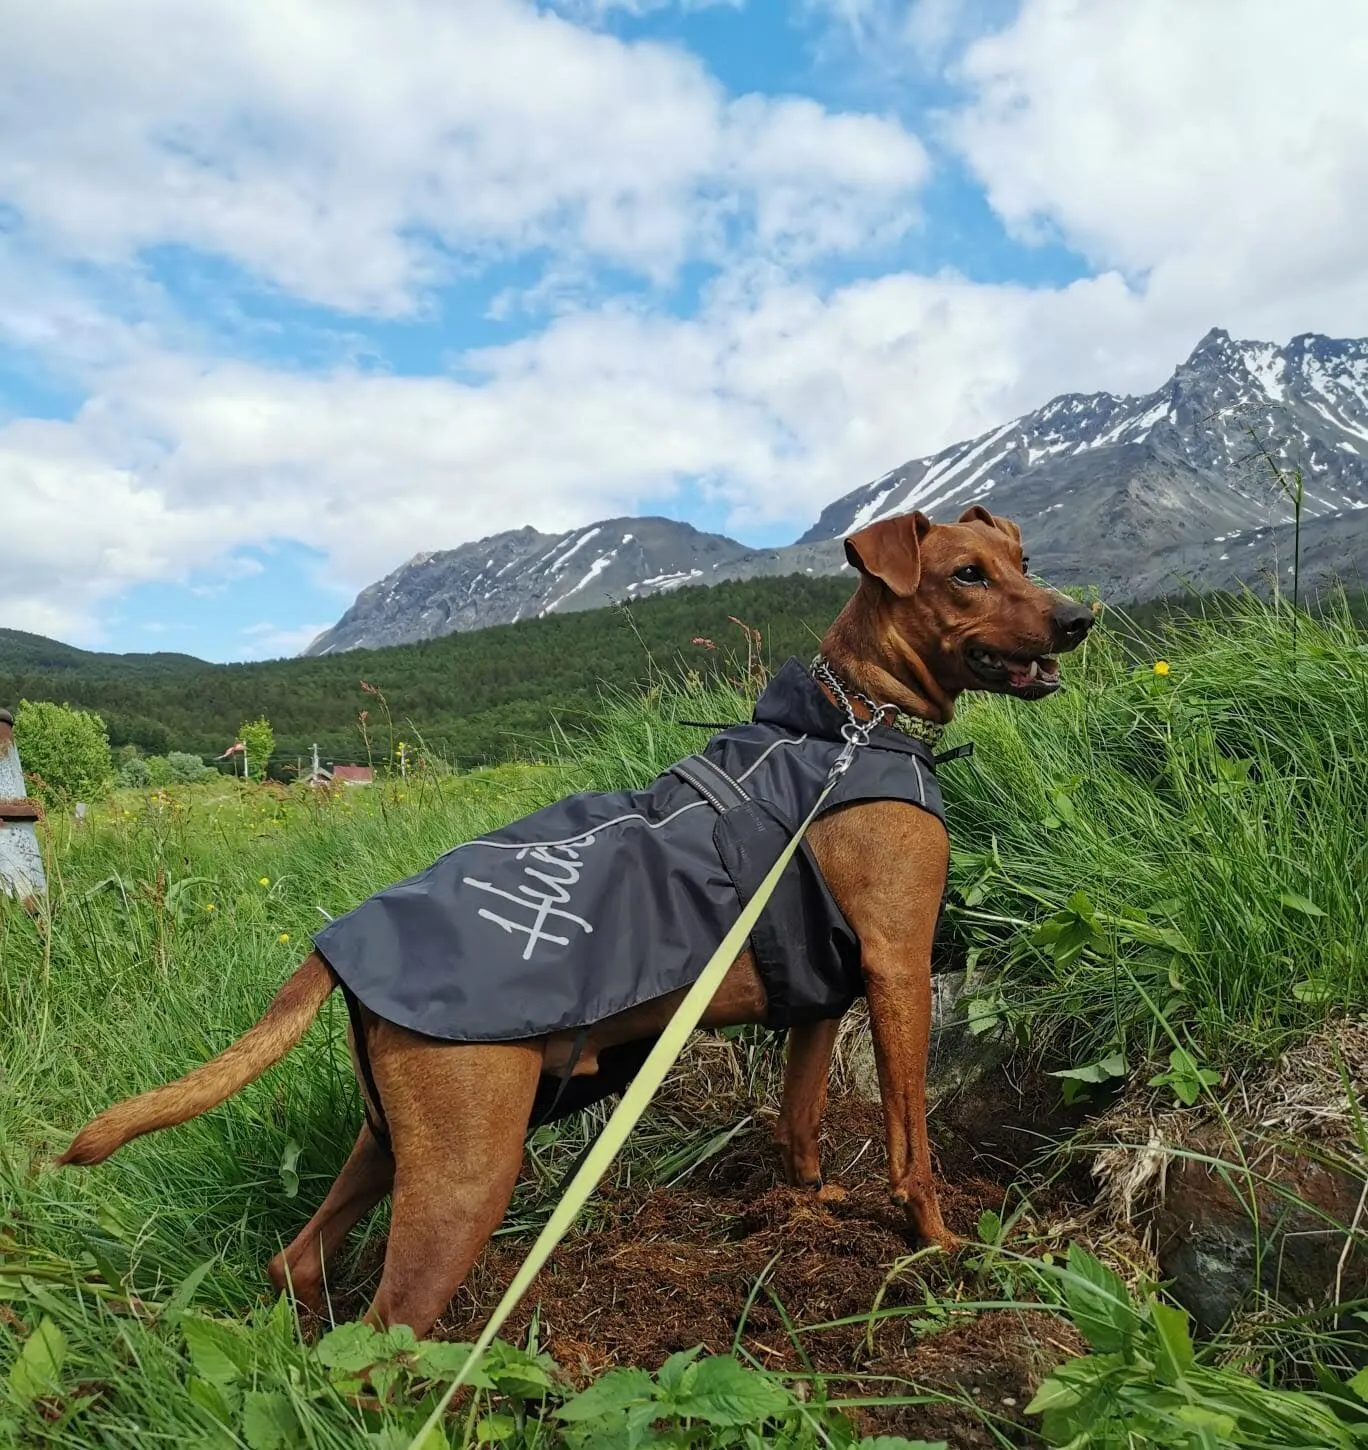 Canion and the Agile Dog Harness: How It All Started